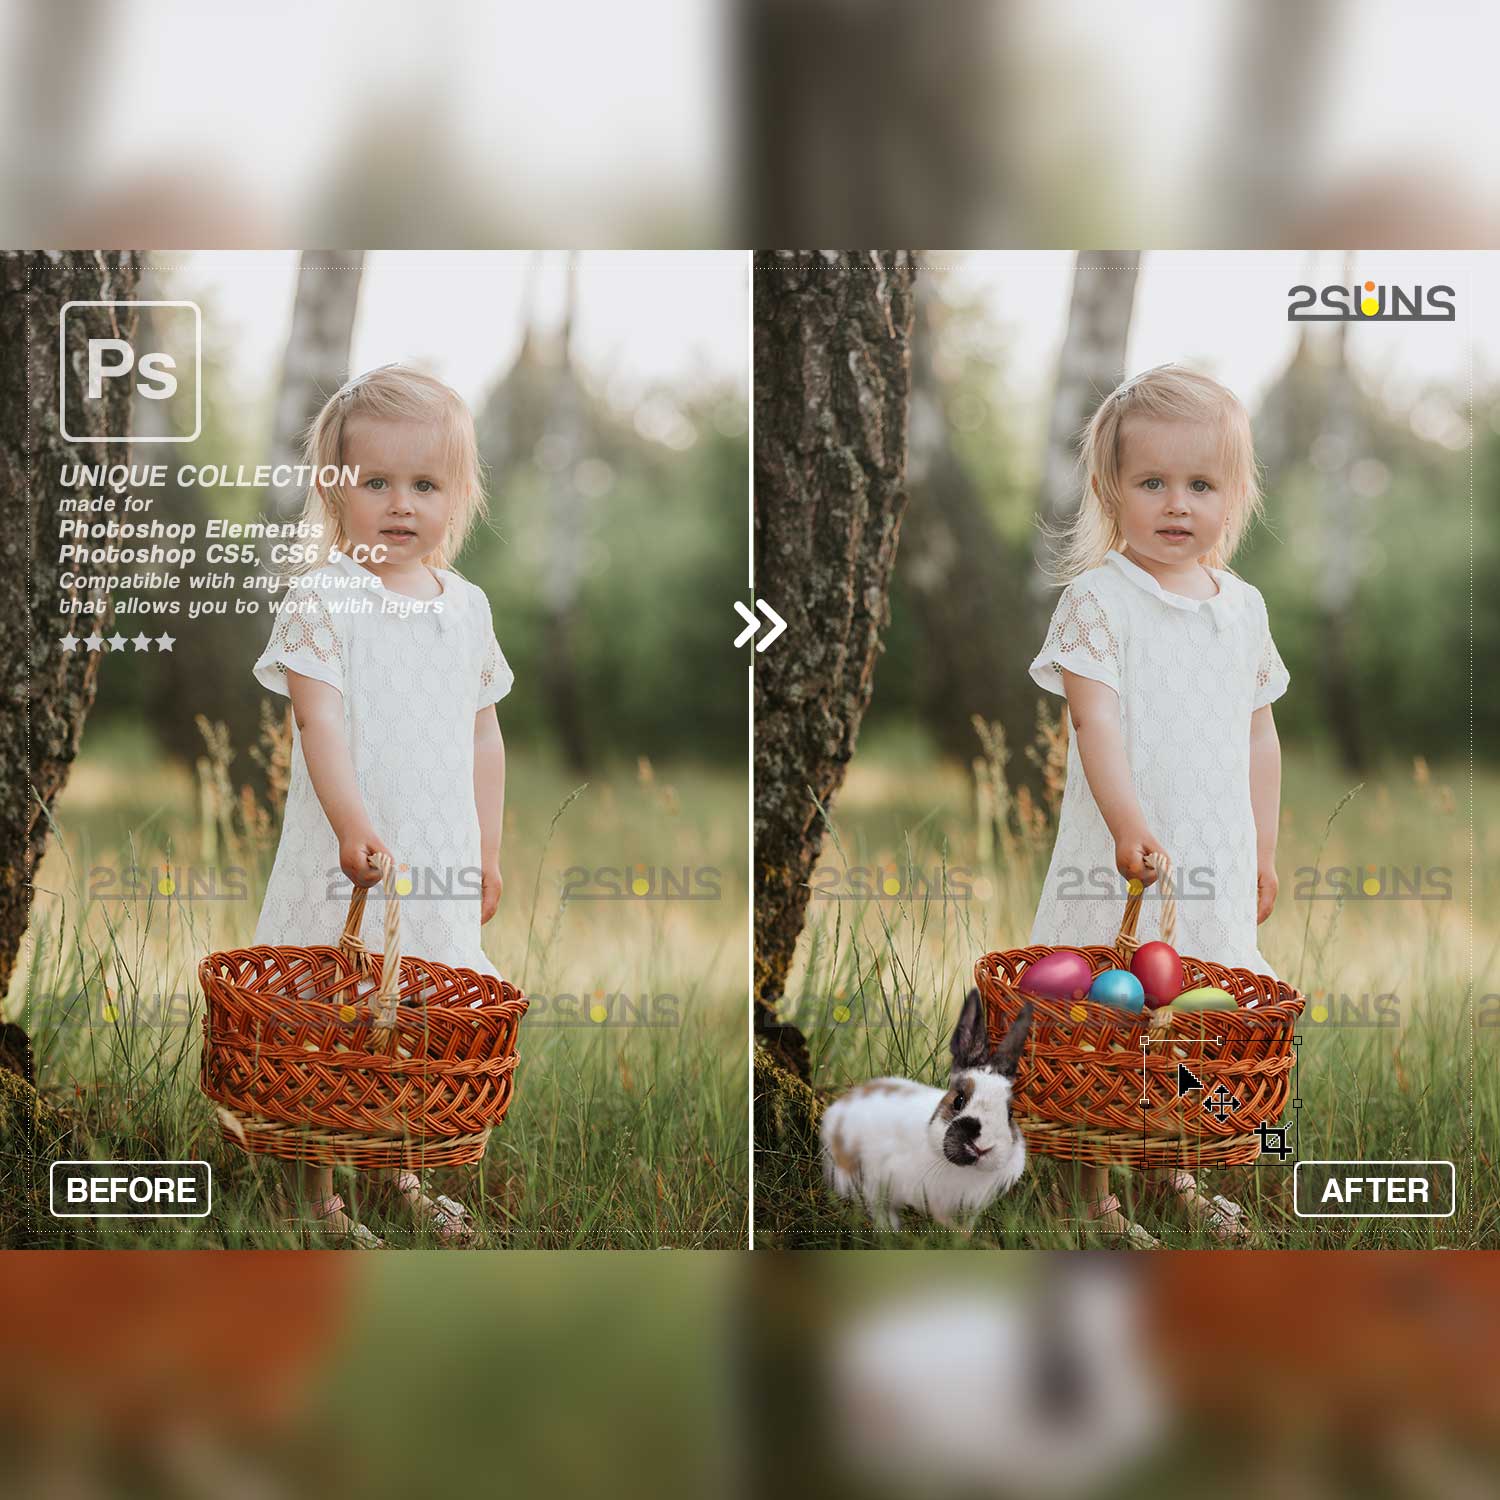 Easter Bunny Modern Photoshop Overlay Before And After.